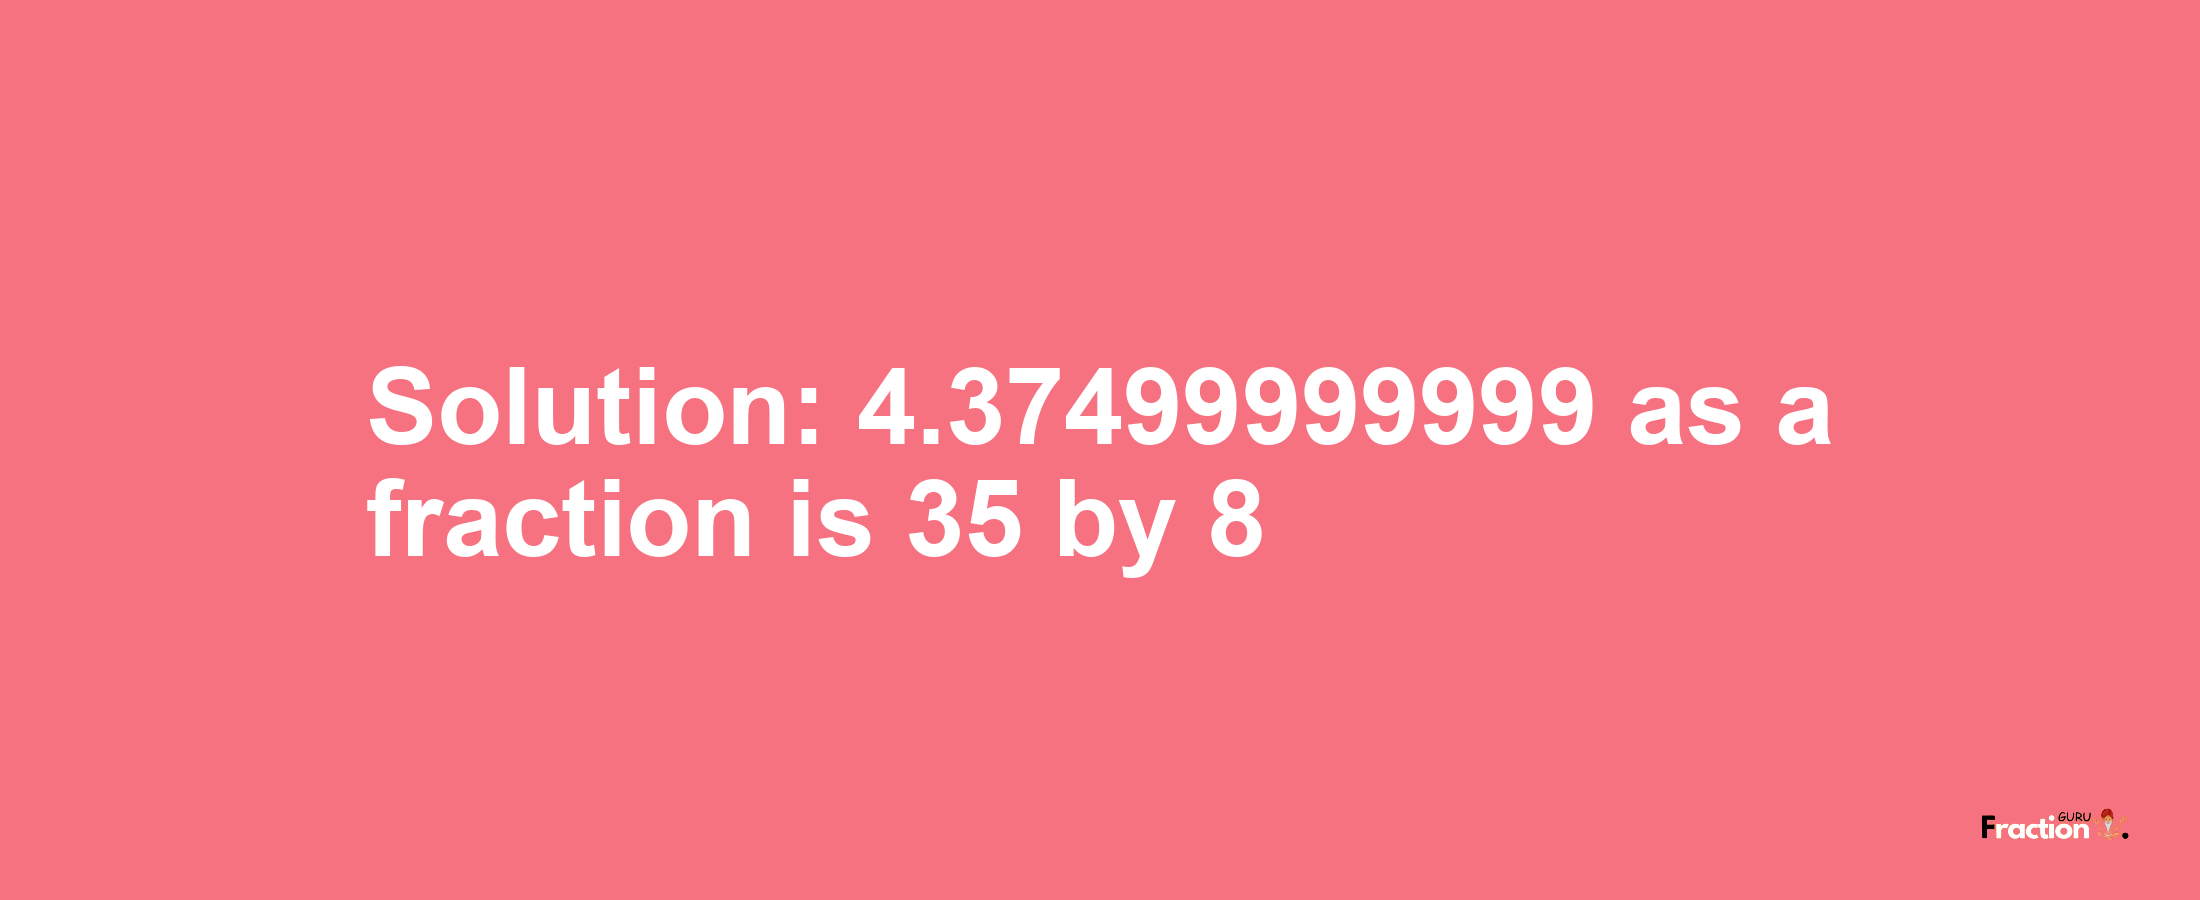 Solution:4.37499999999 as a fraction is 35/8